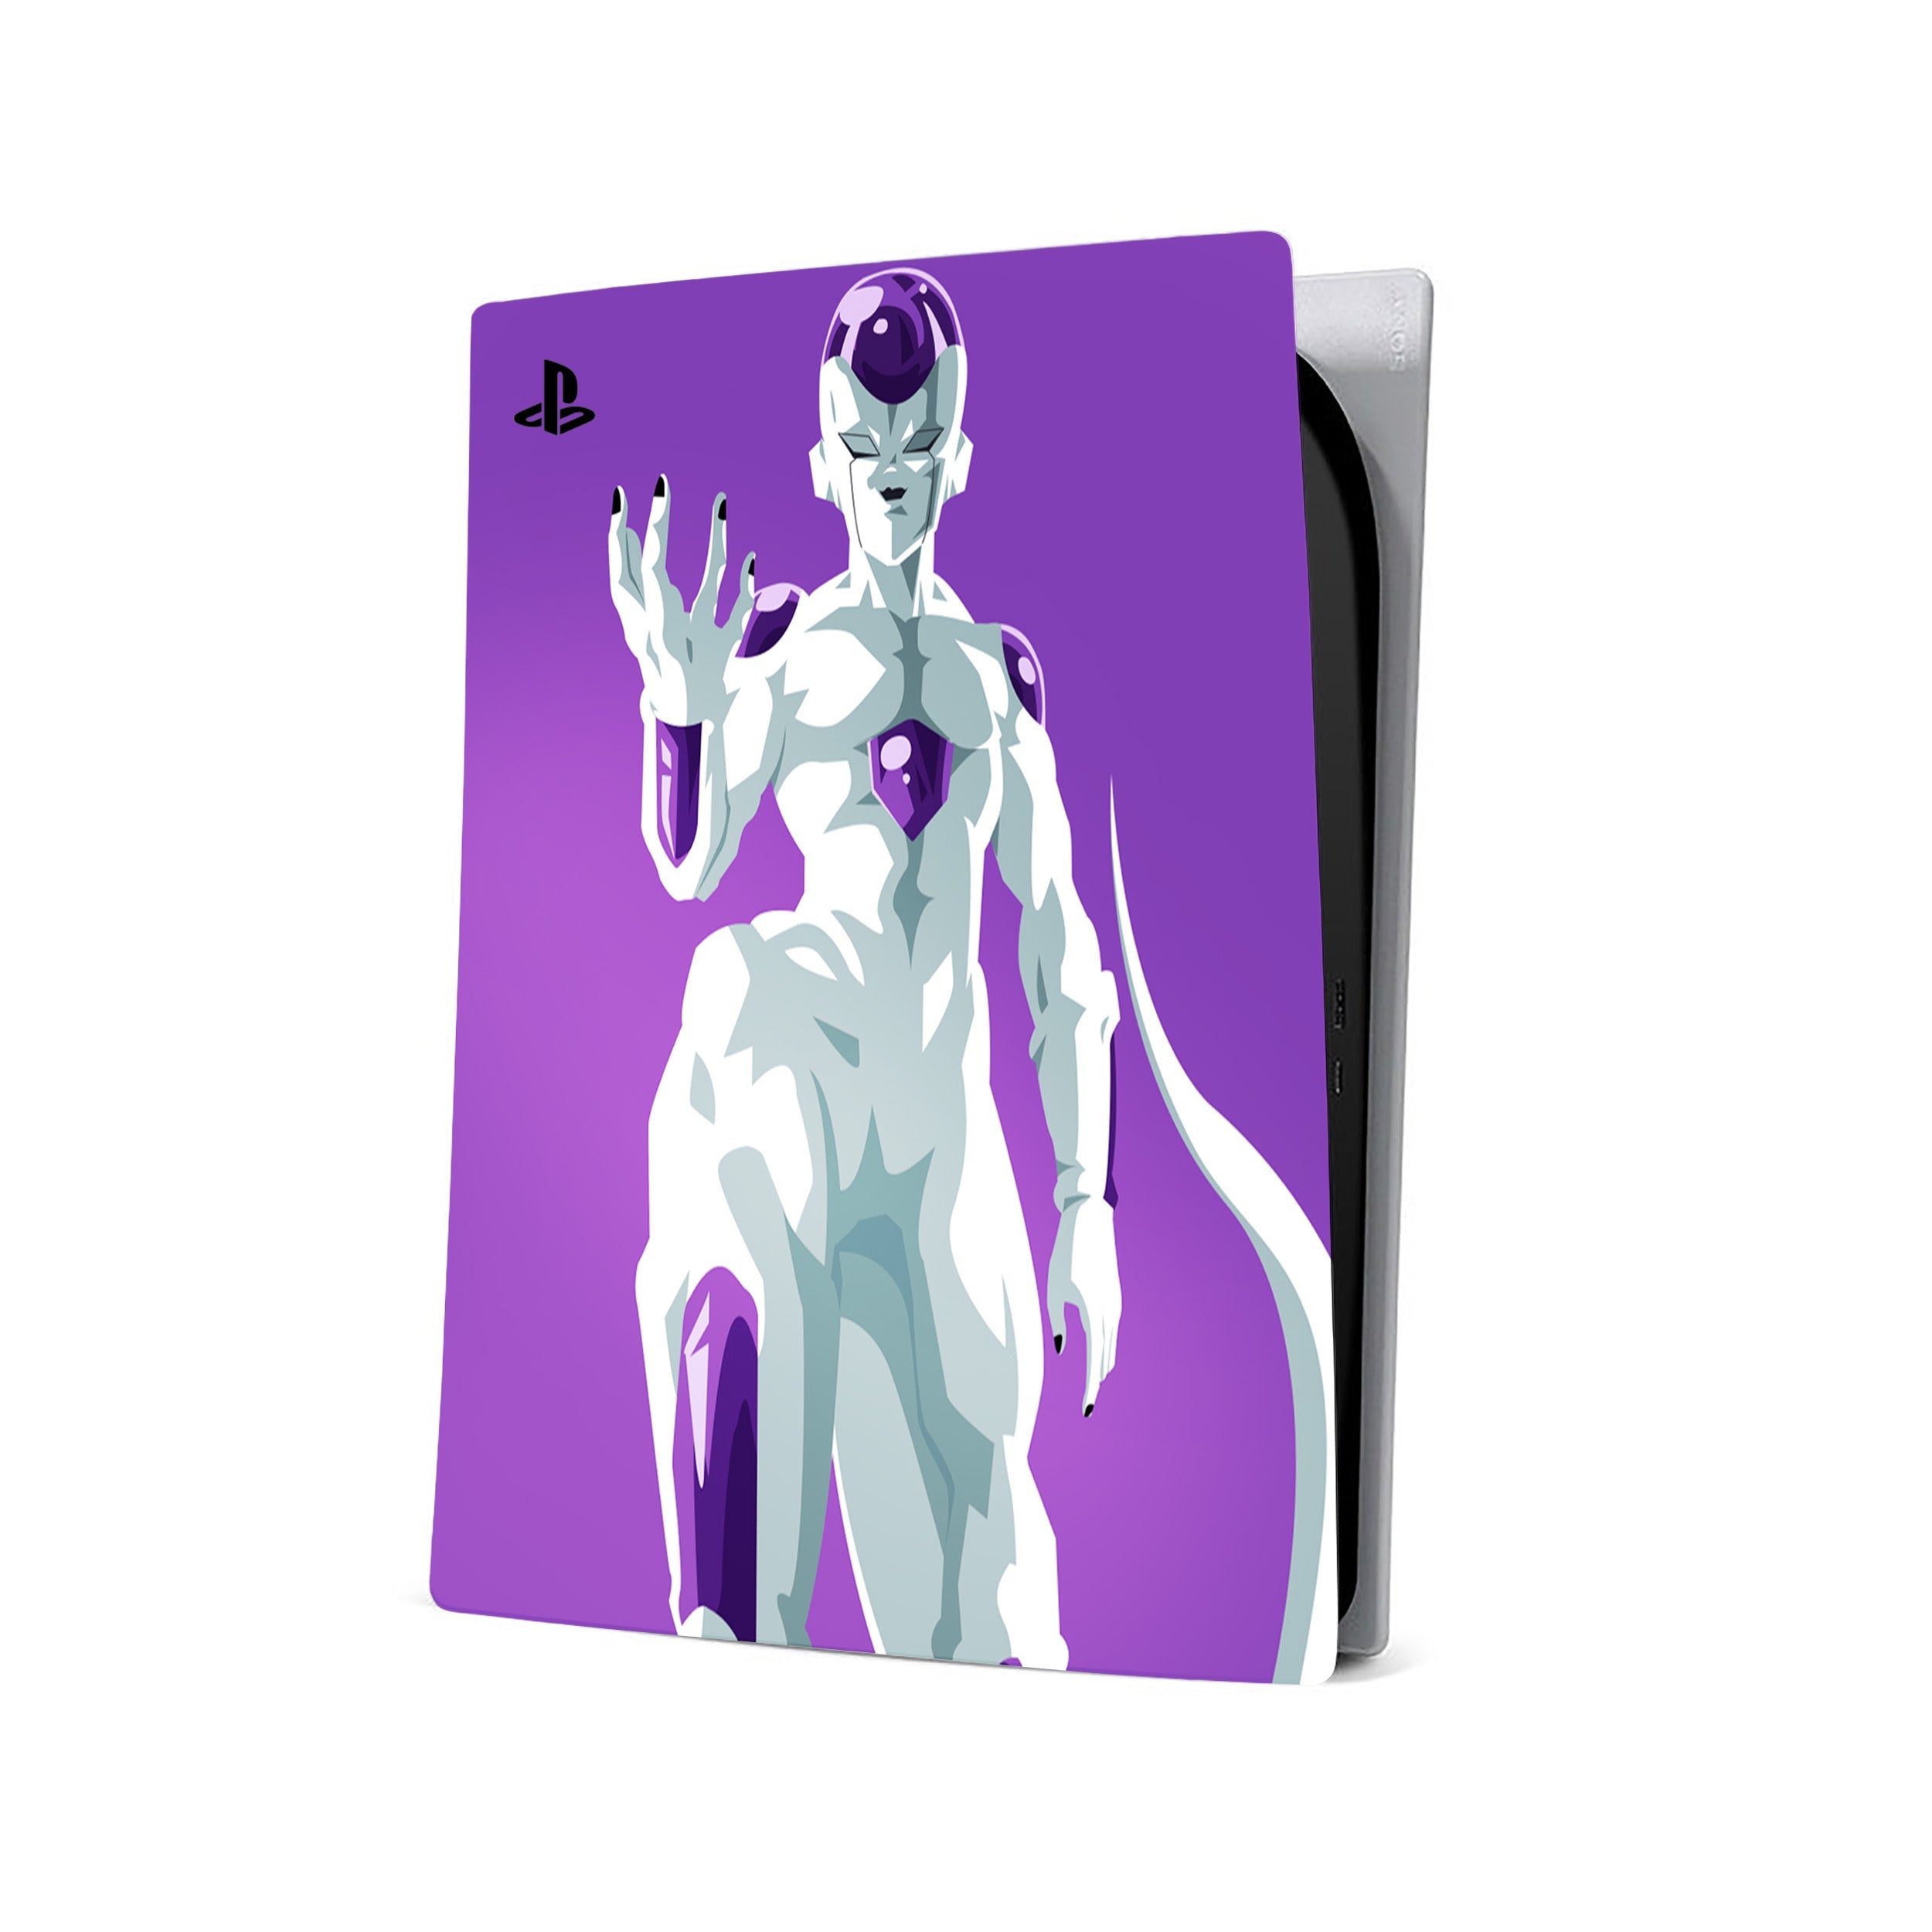 A video game skin featuring a Dragon Ball Z Frieza design for the PS5.